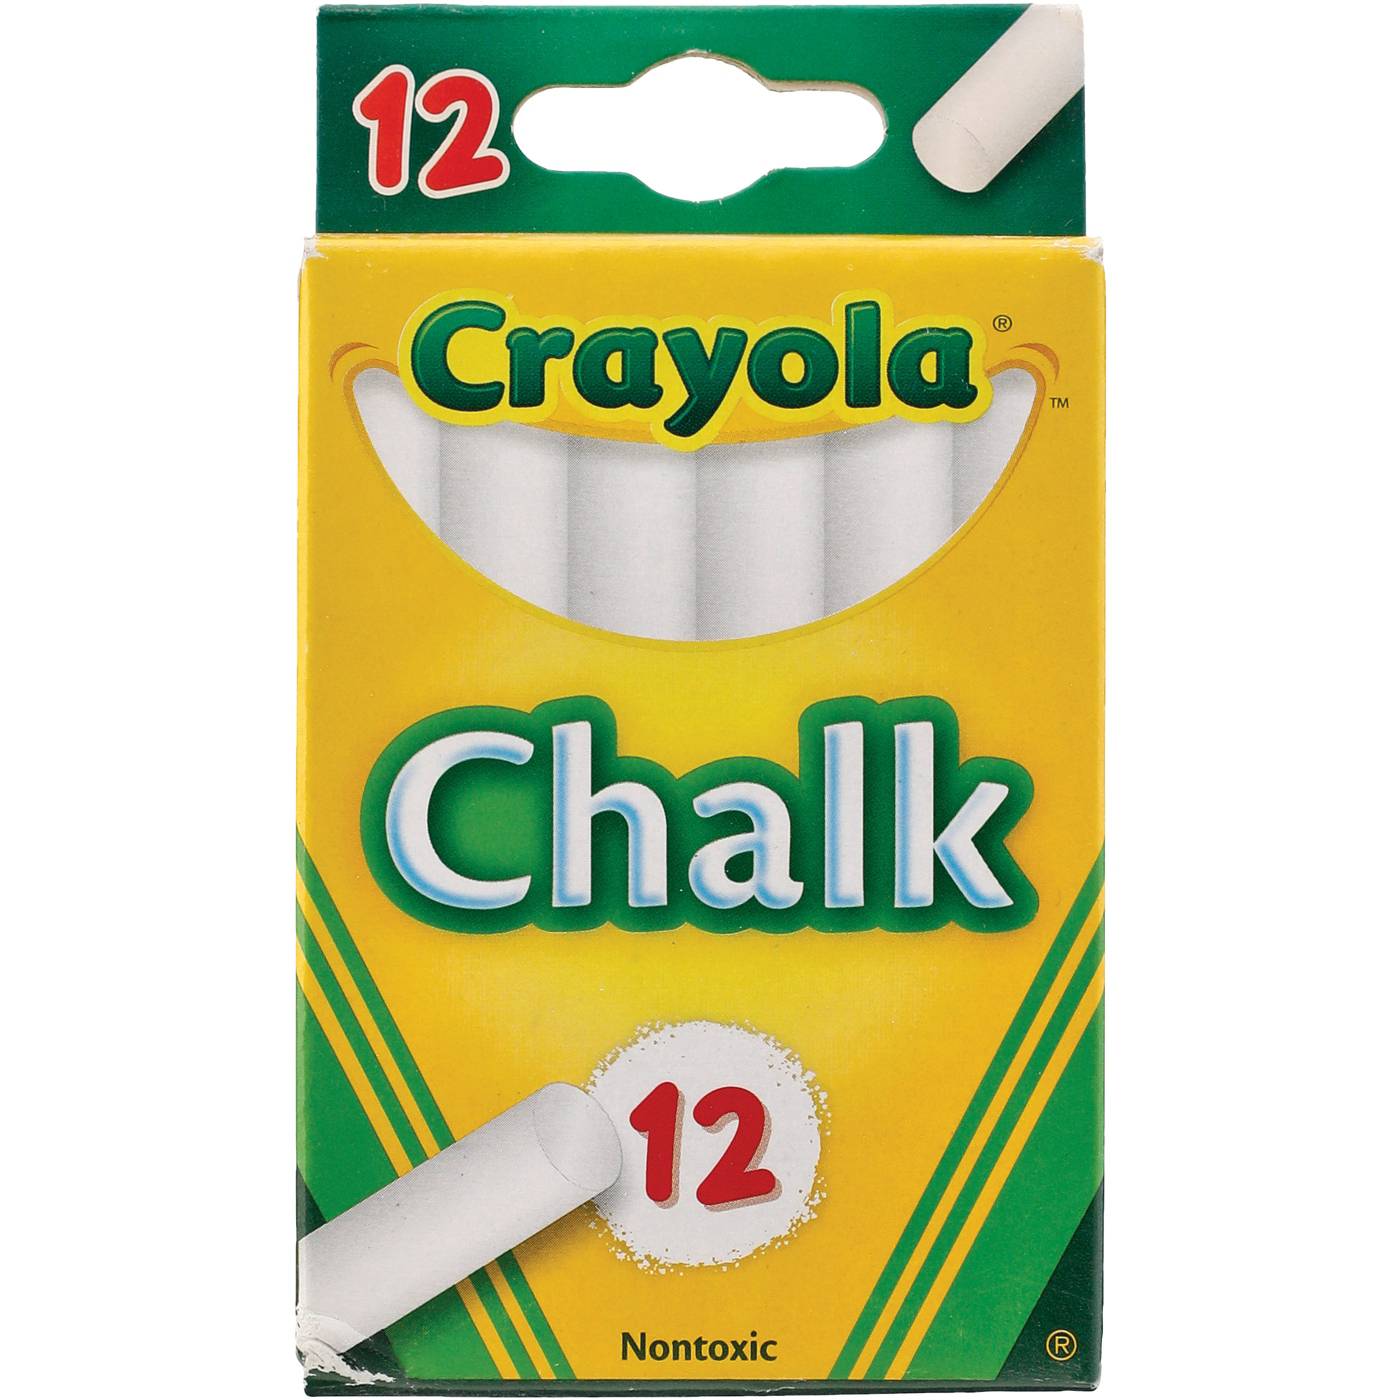 Large White Crayons - 12 Count